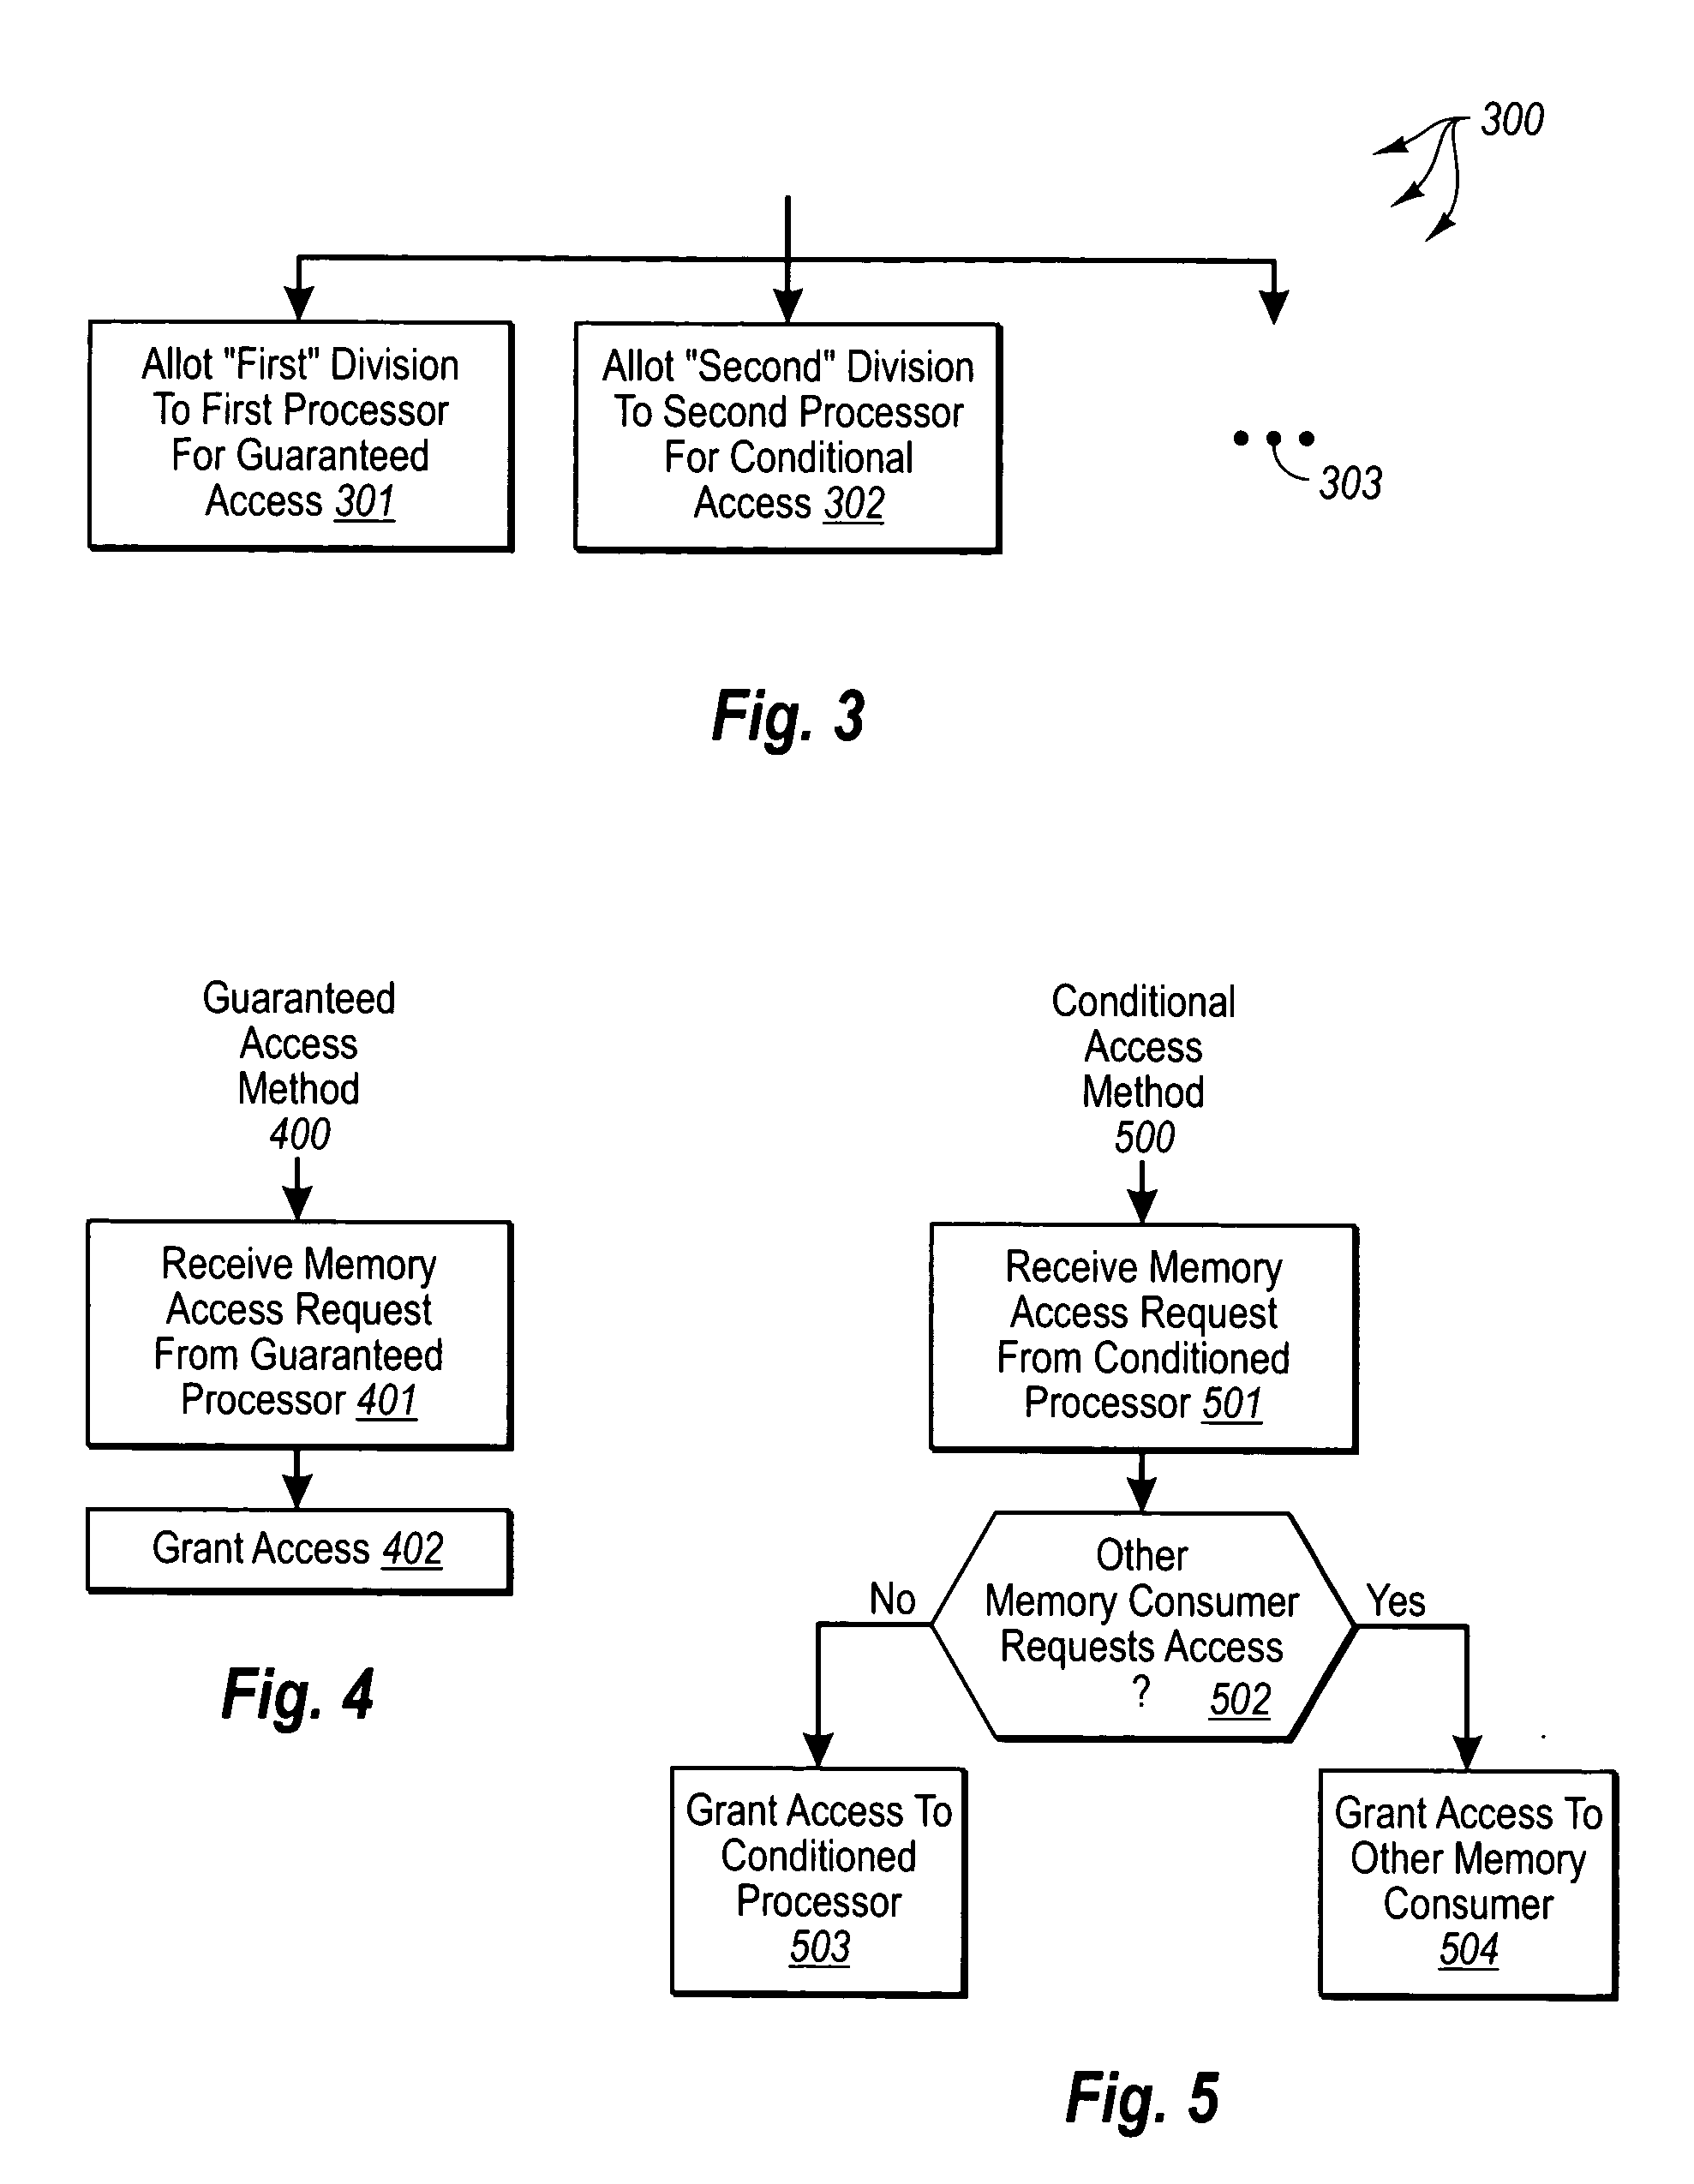 Contingent processor time division multiple access of memory in a multi-processor system to allow supplemental memory consumer access